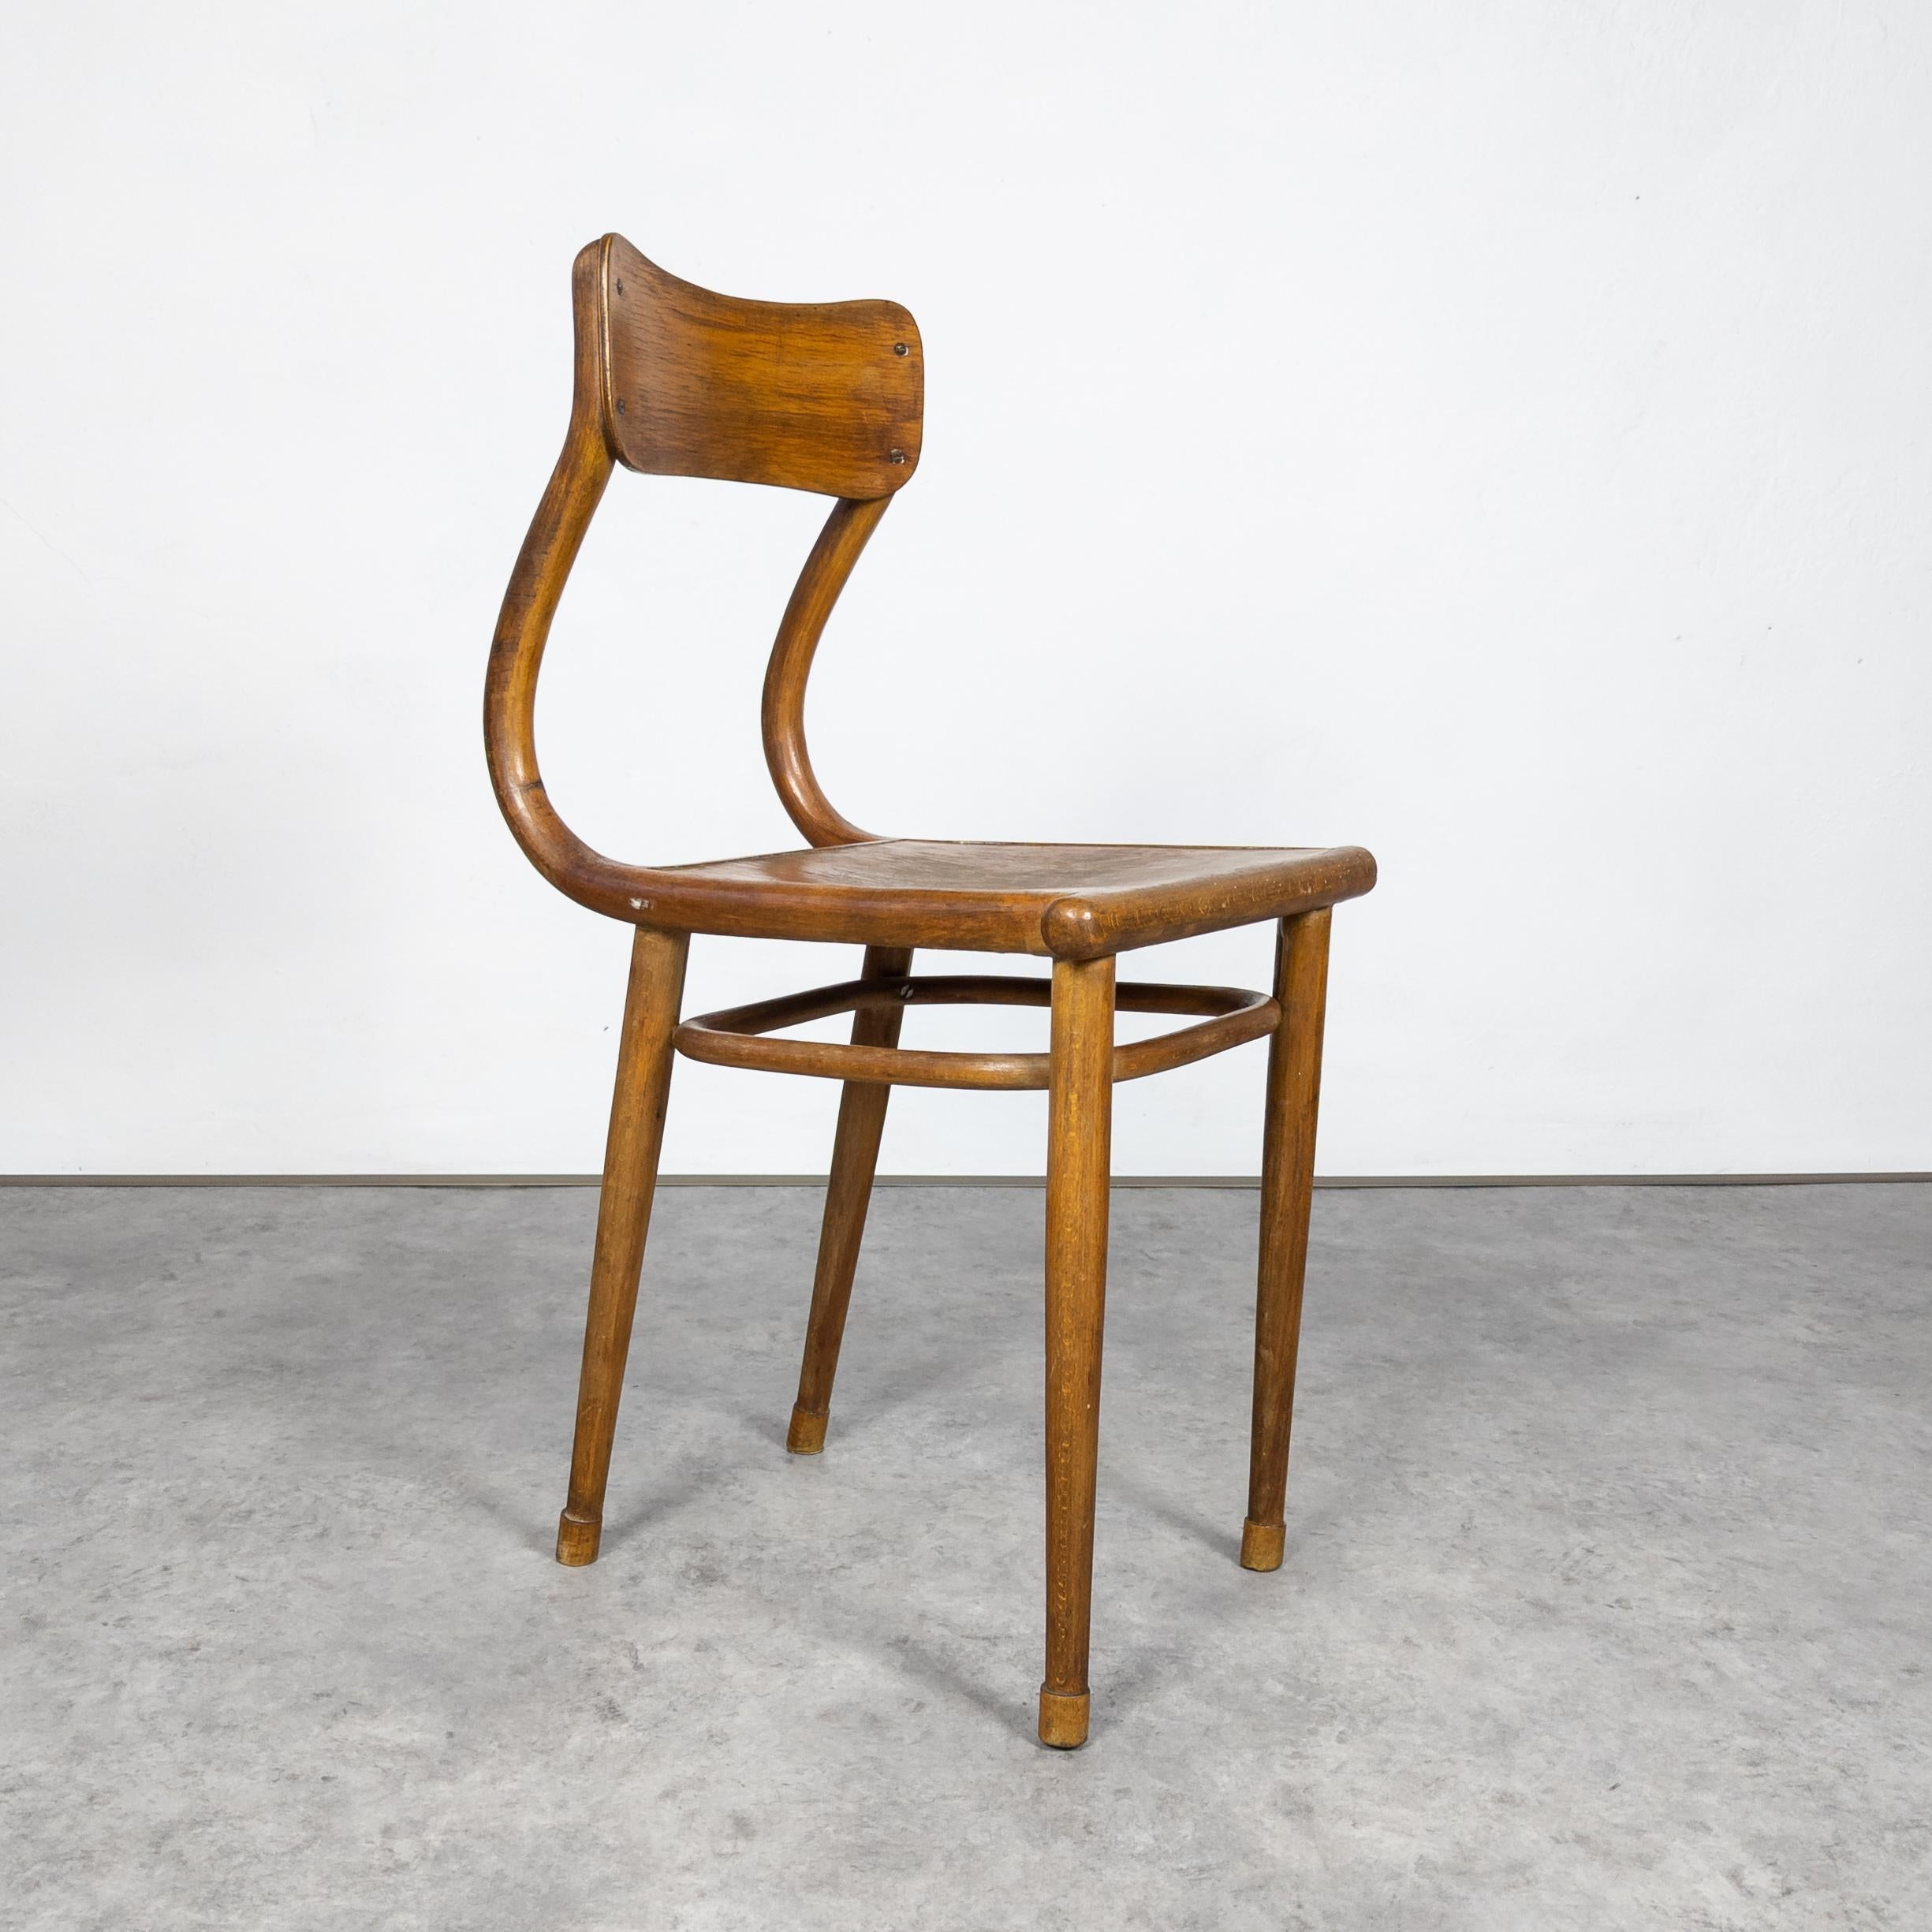 Made of bent beech wood. Manufactured by Thonet Mundus in 1930's. This particular chair was being used in the offices of Koh-I-Noor factory in Budweis, Czechoslovakia. Labeled with Thonet factory trade mark. Rare collectors piece in good original